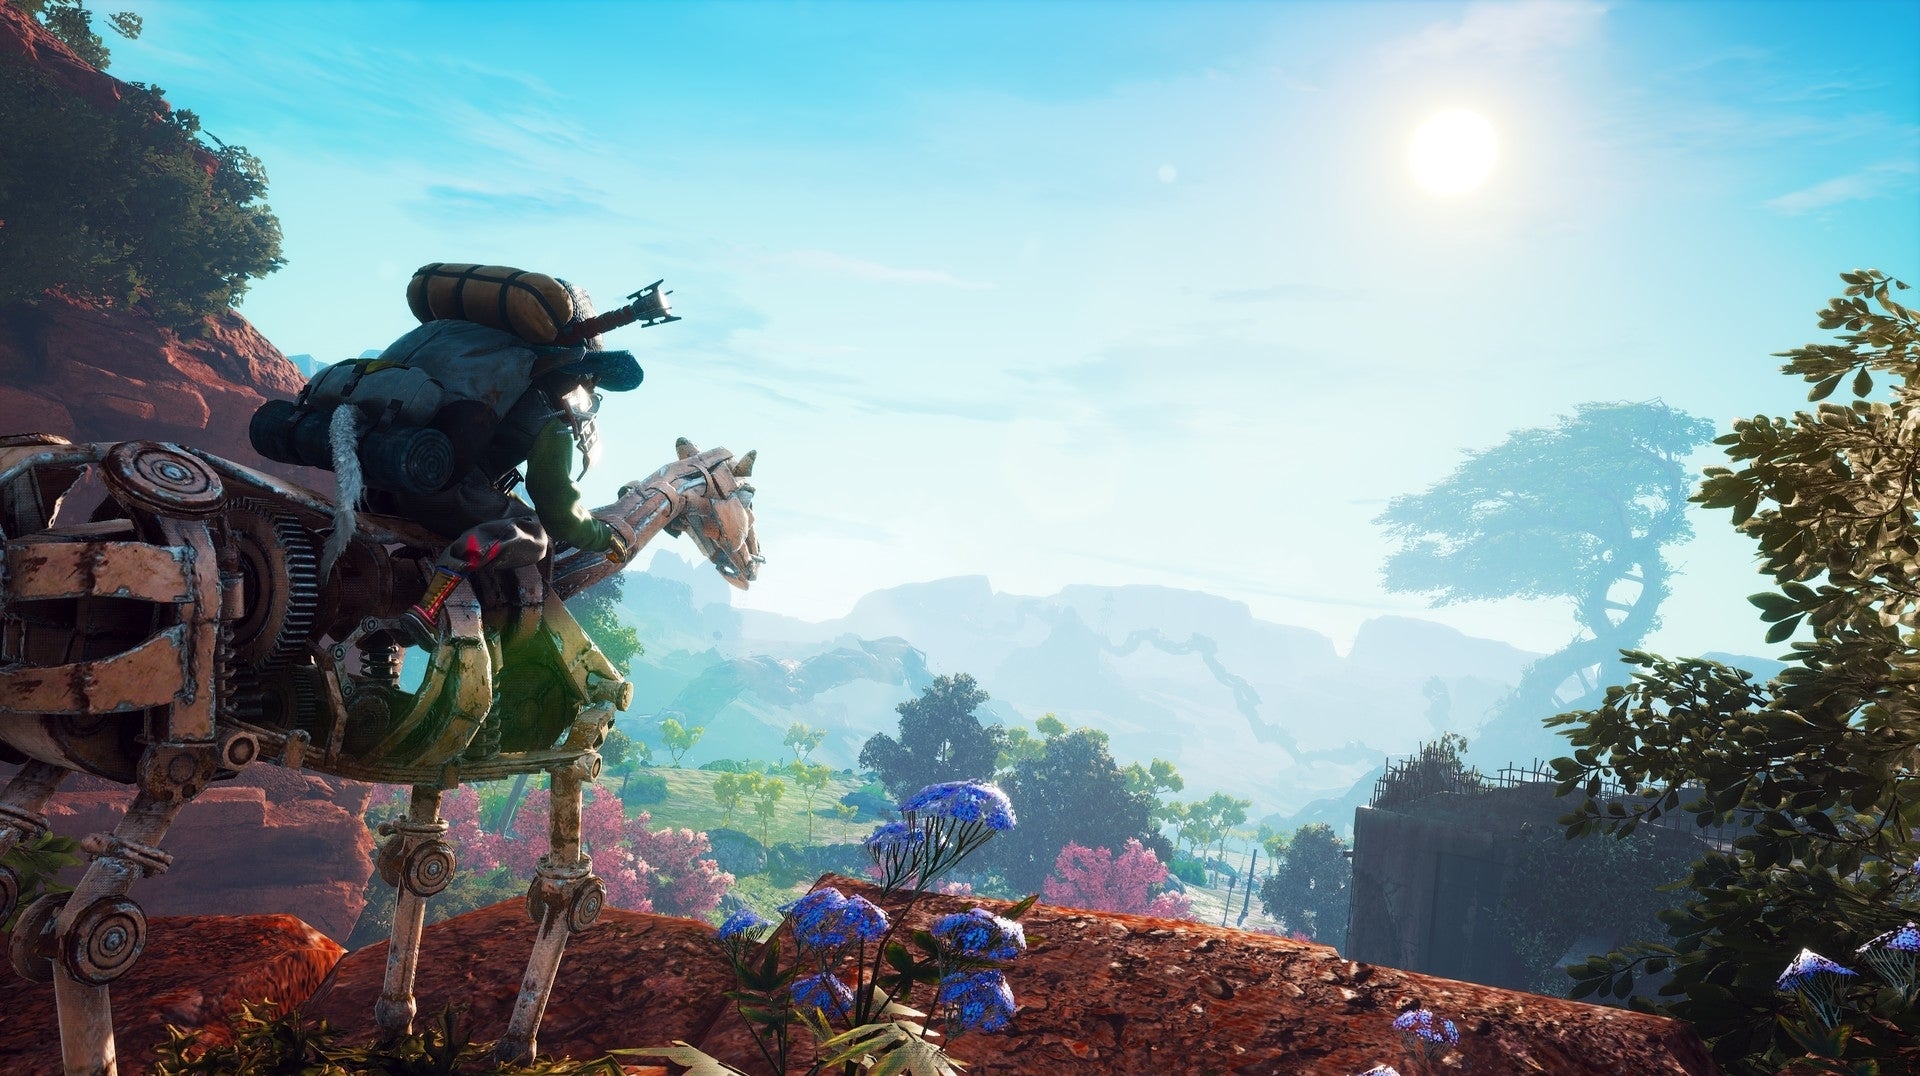 Image for Biomutant's most significant patch yet increases level cap and adds scrap from loot screen, among many other changes